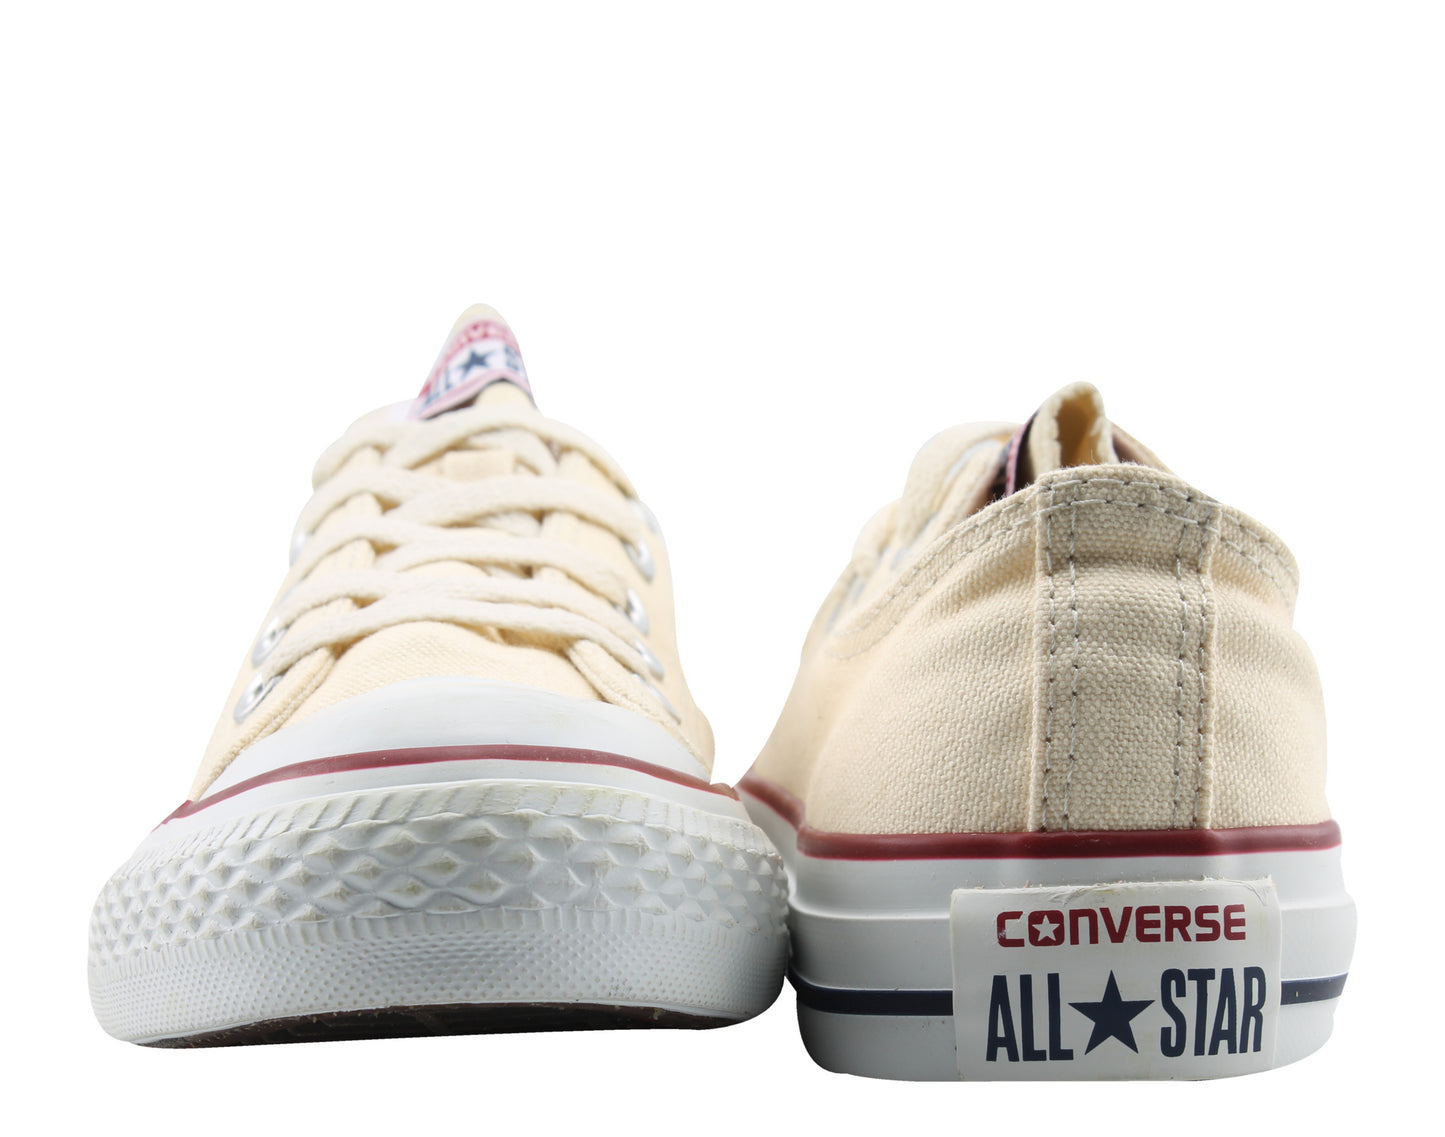 Converse Chuck Taylor All Star OX White Low Top Sneakers M9165